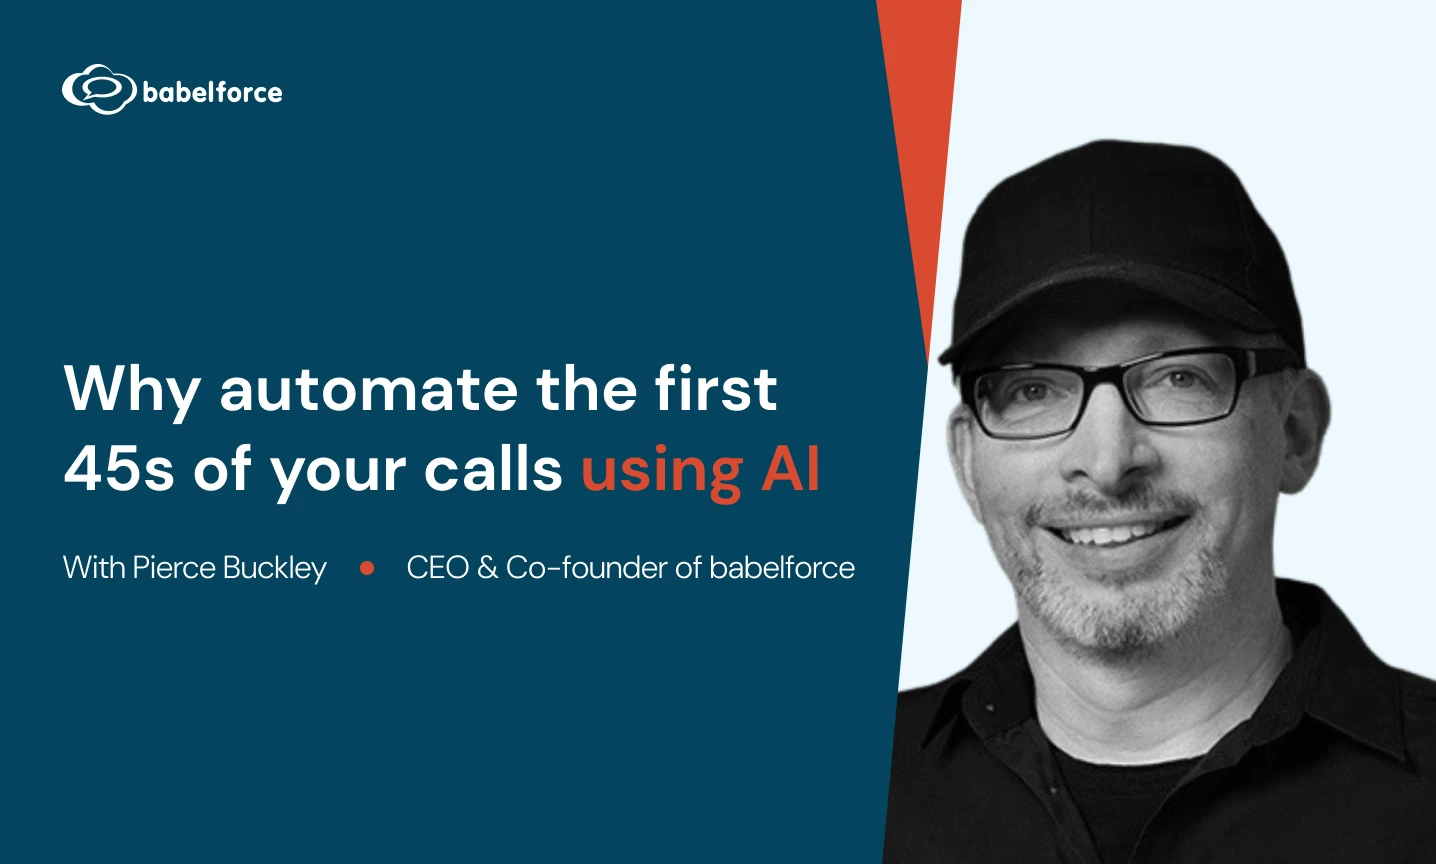 Why automate the first 45s of your calls using AI